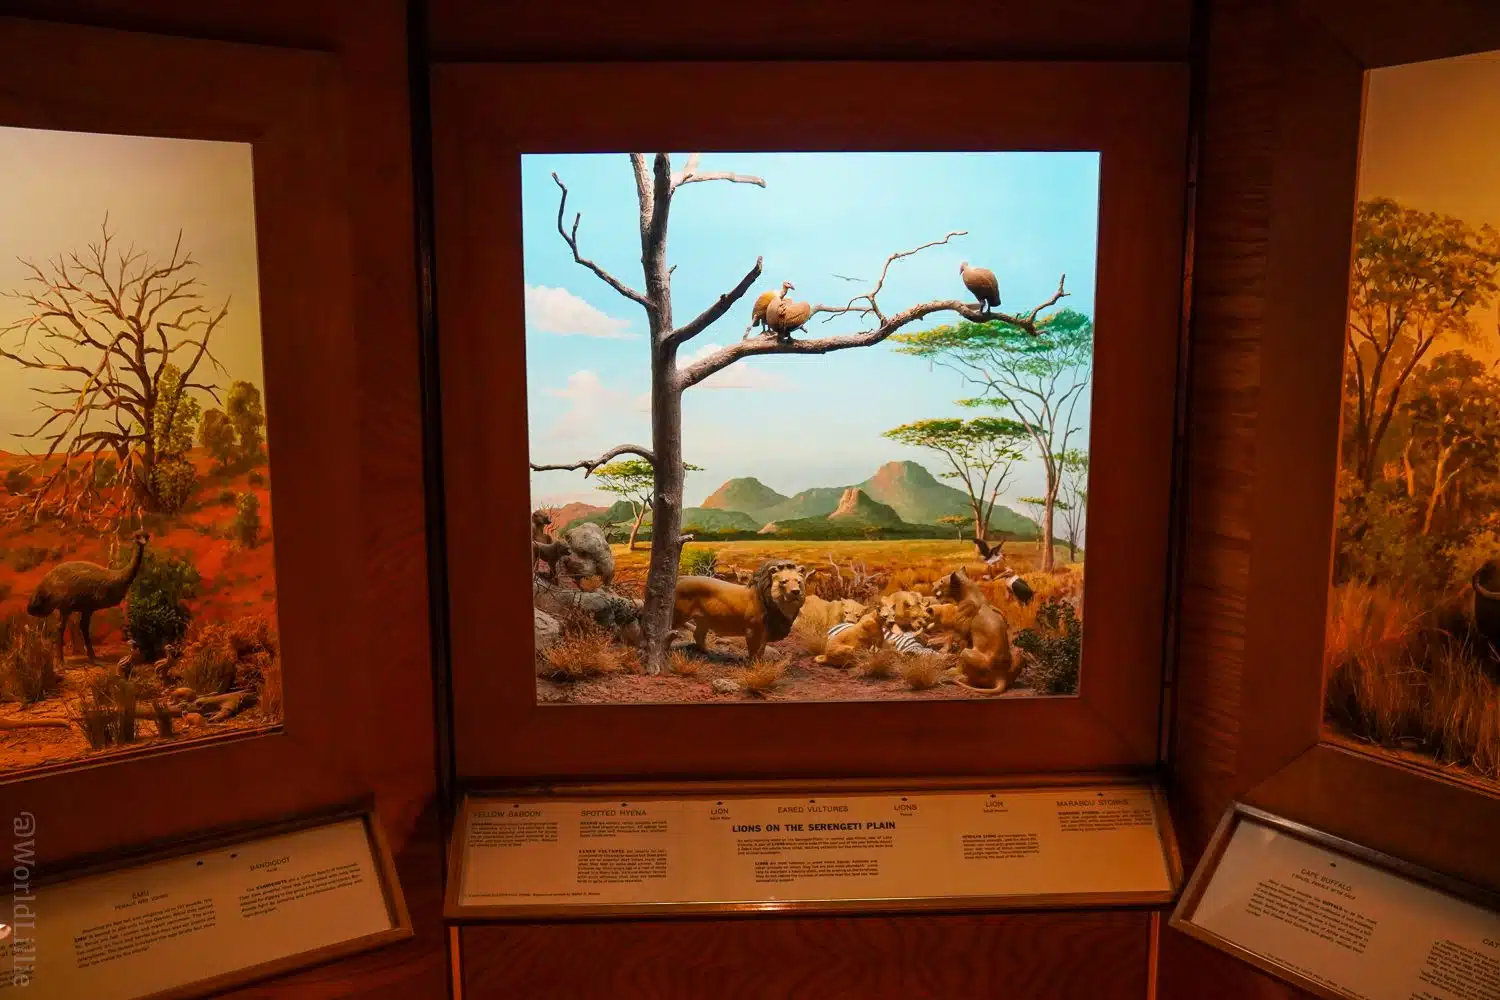 A diorama of lions in their native habitat.